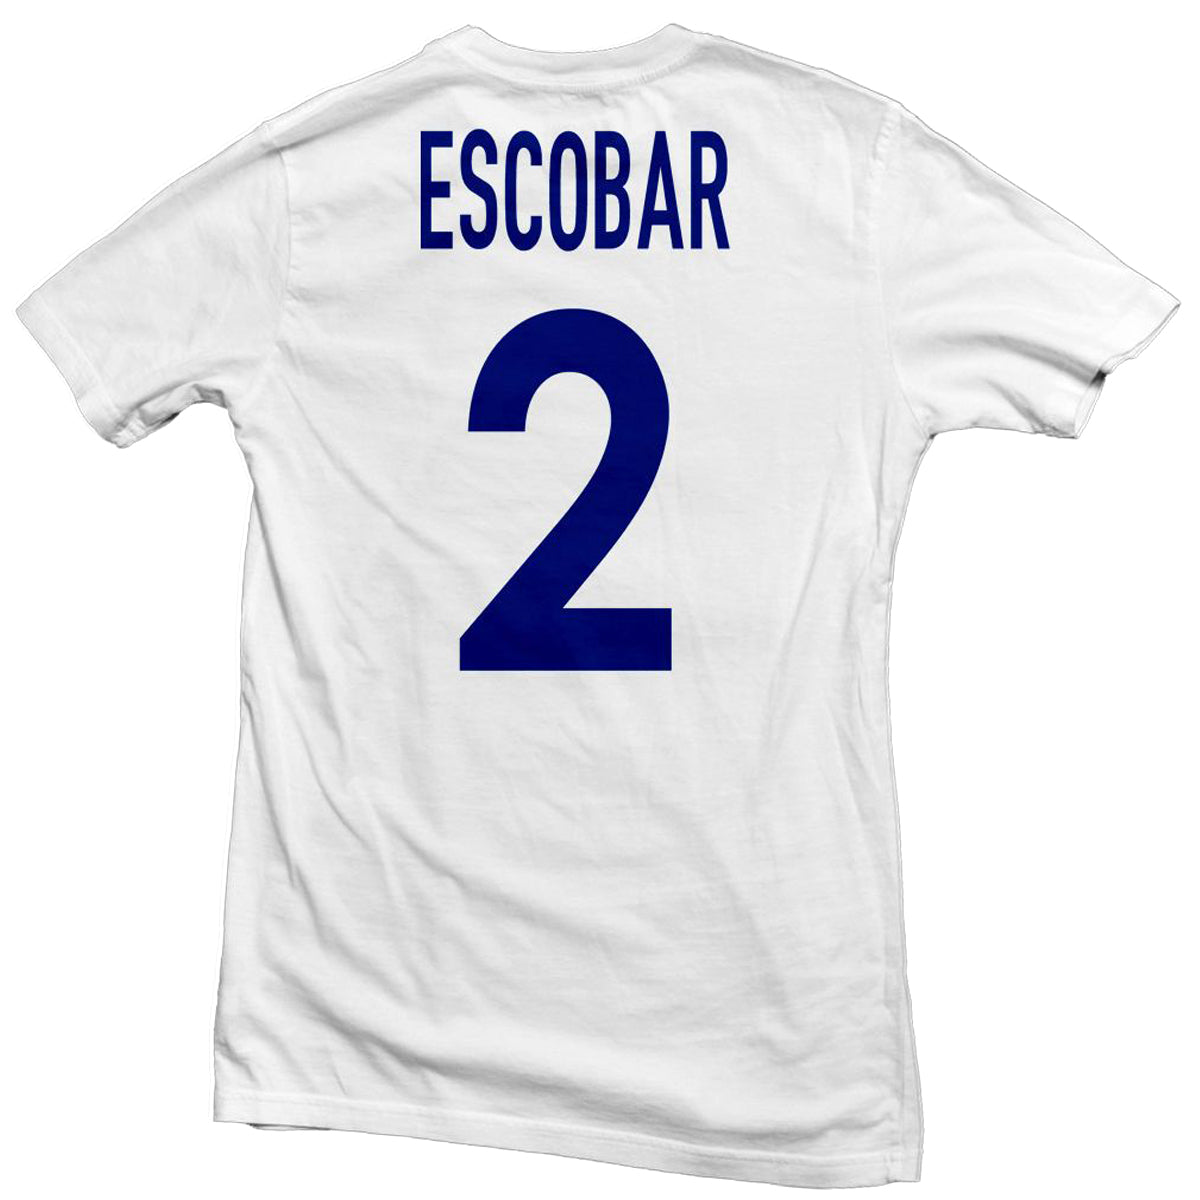 Colombia Los Cafeteros Legend Tee: Escobar T-Shirt 411 White Youth Medium 